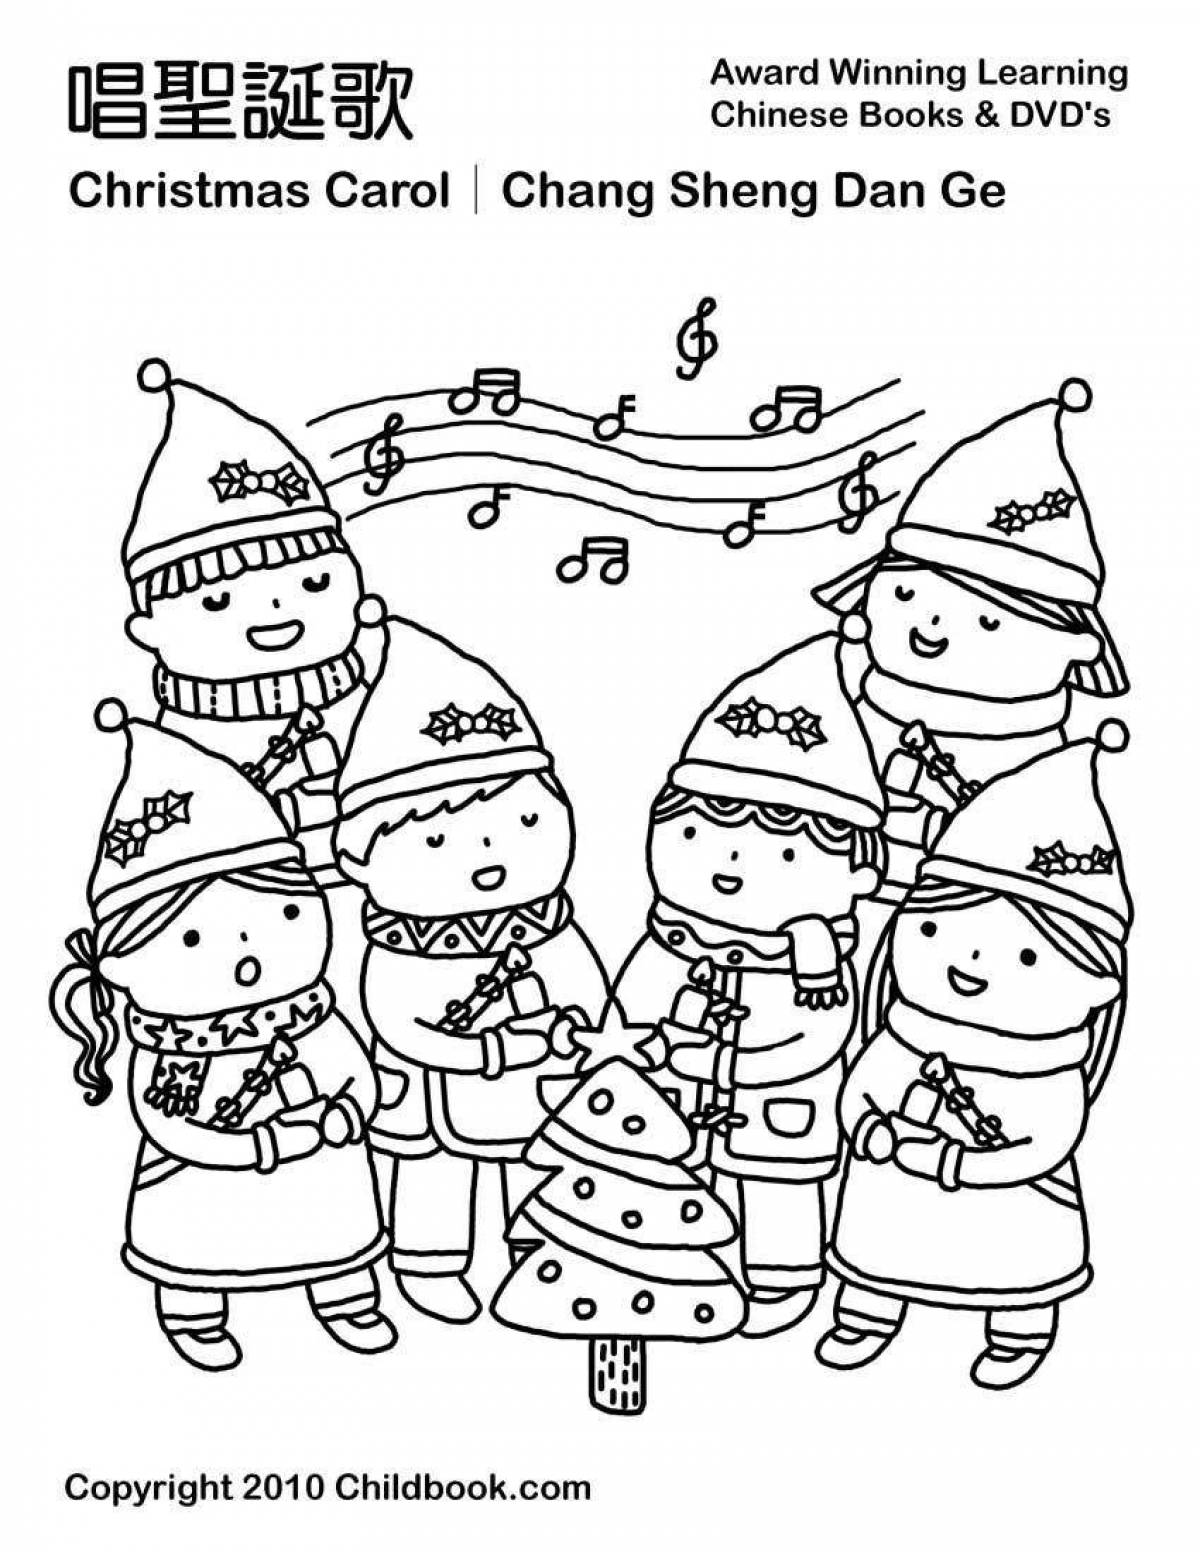 Exquisite carol coloring pages for kids